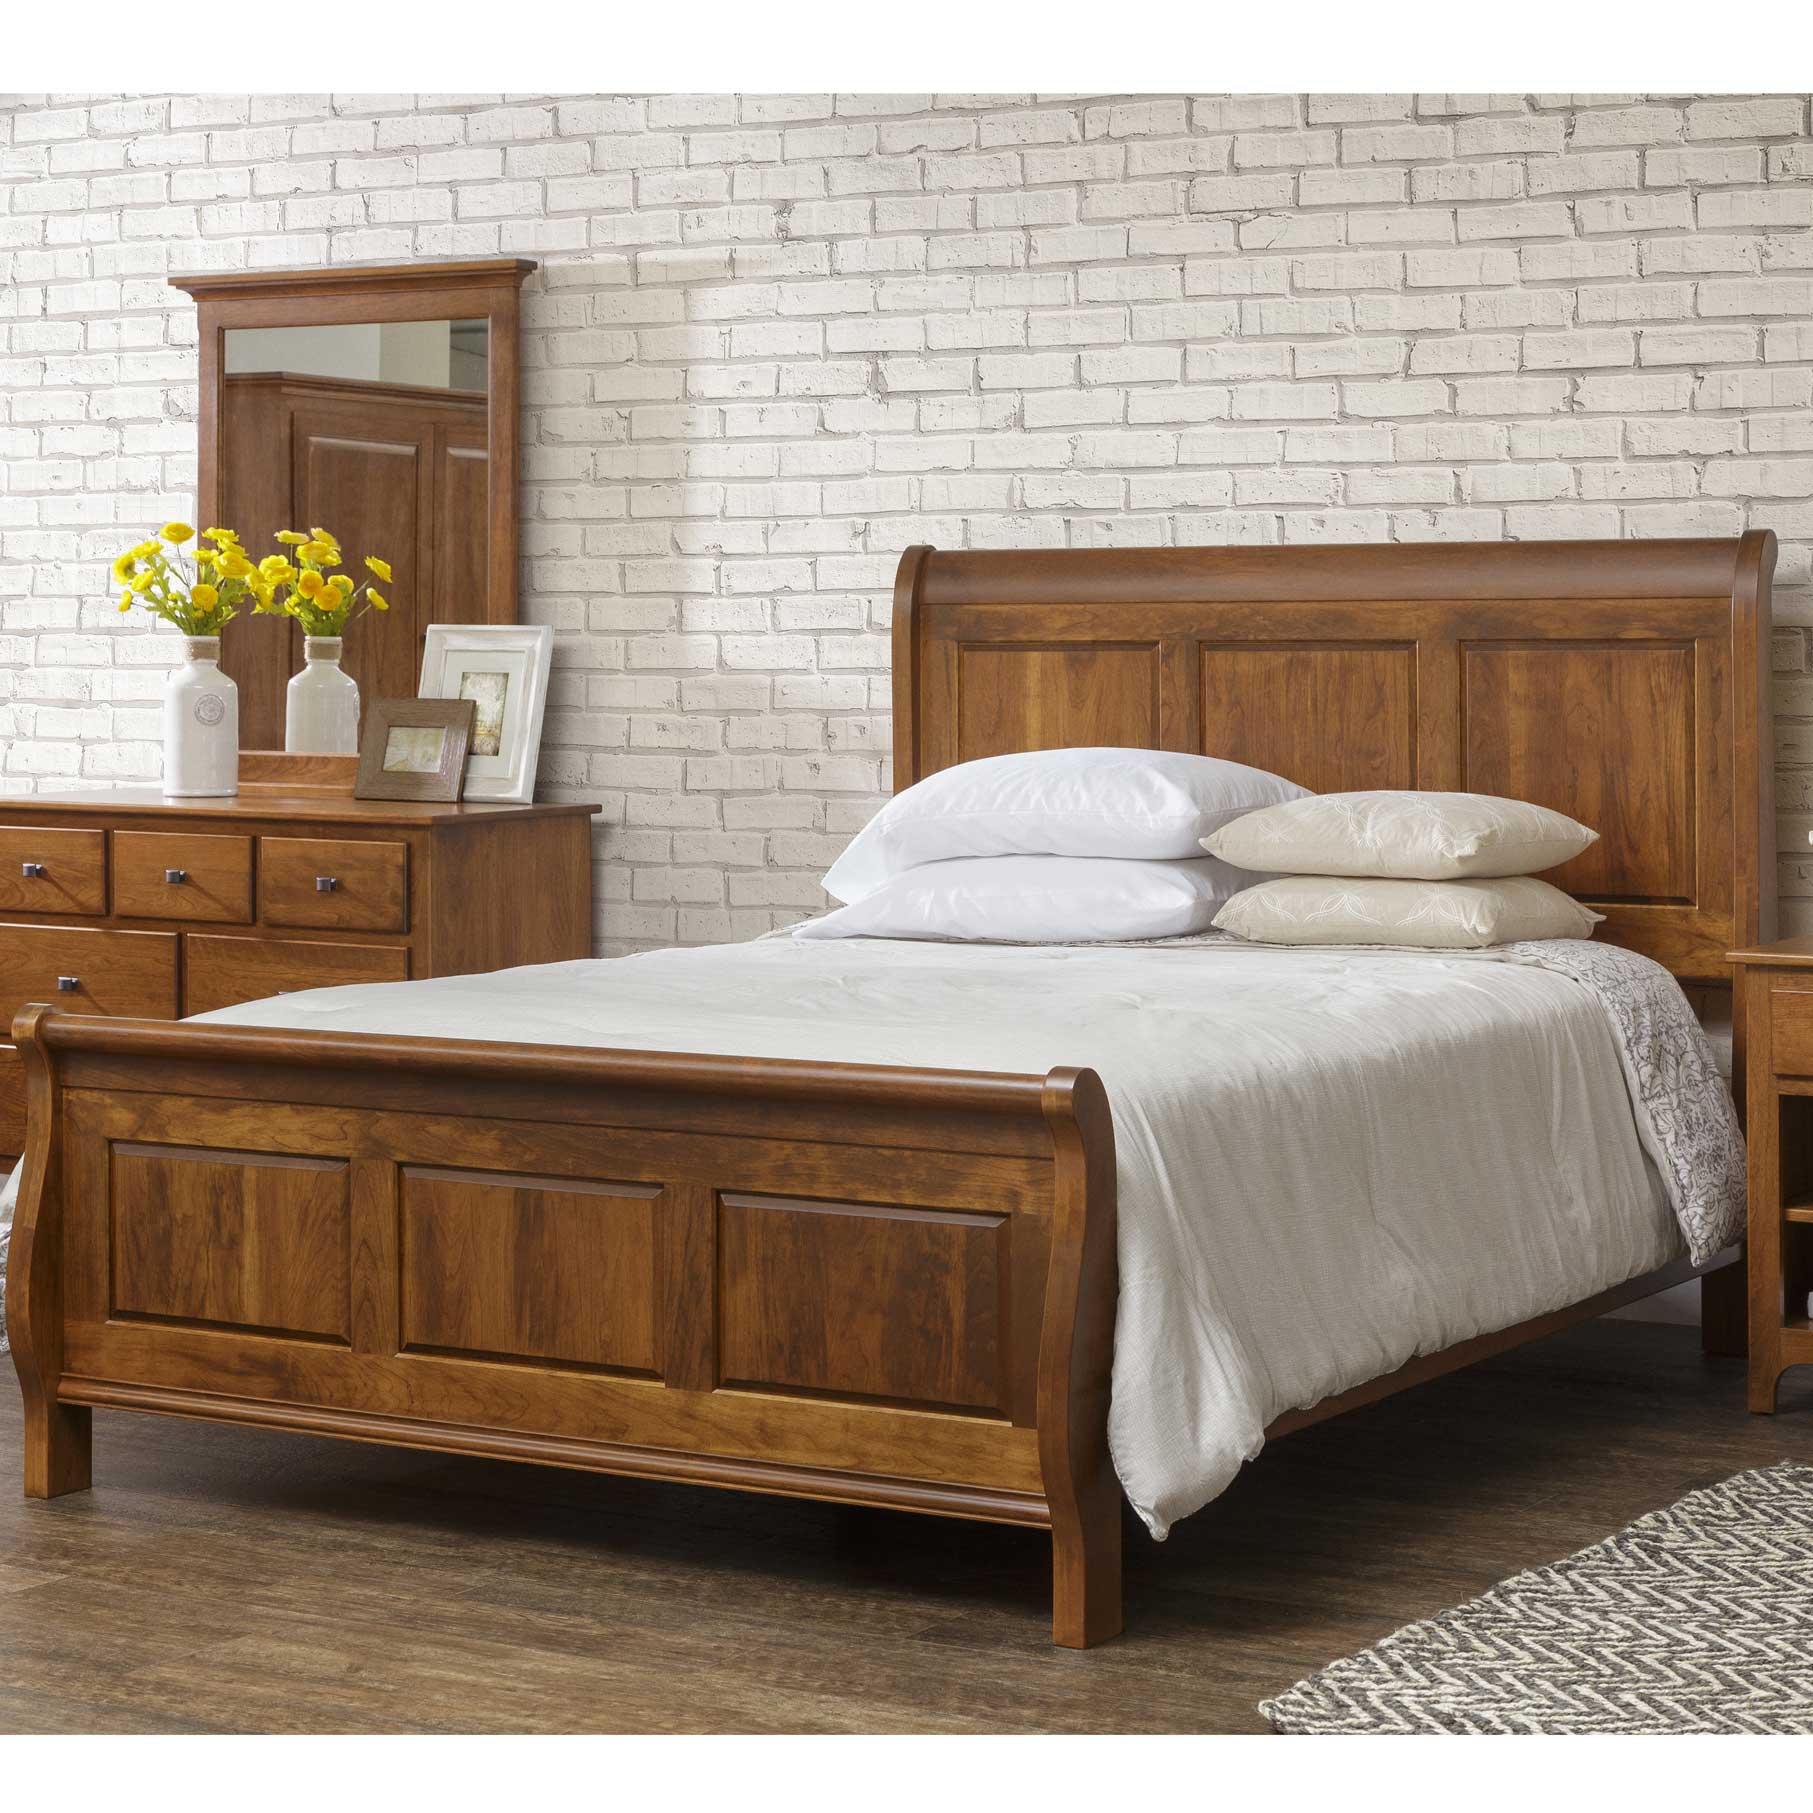 Plymouth Amish Solid Wood Sleigh Bed - snyders.furniture